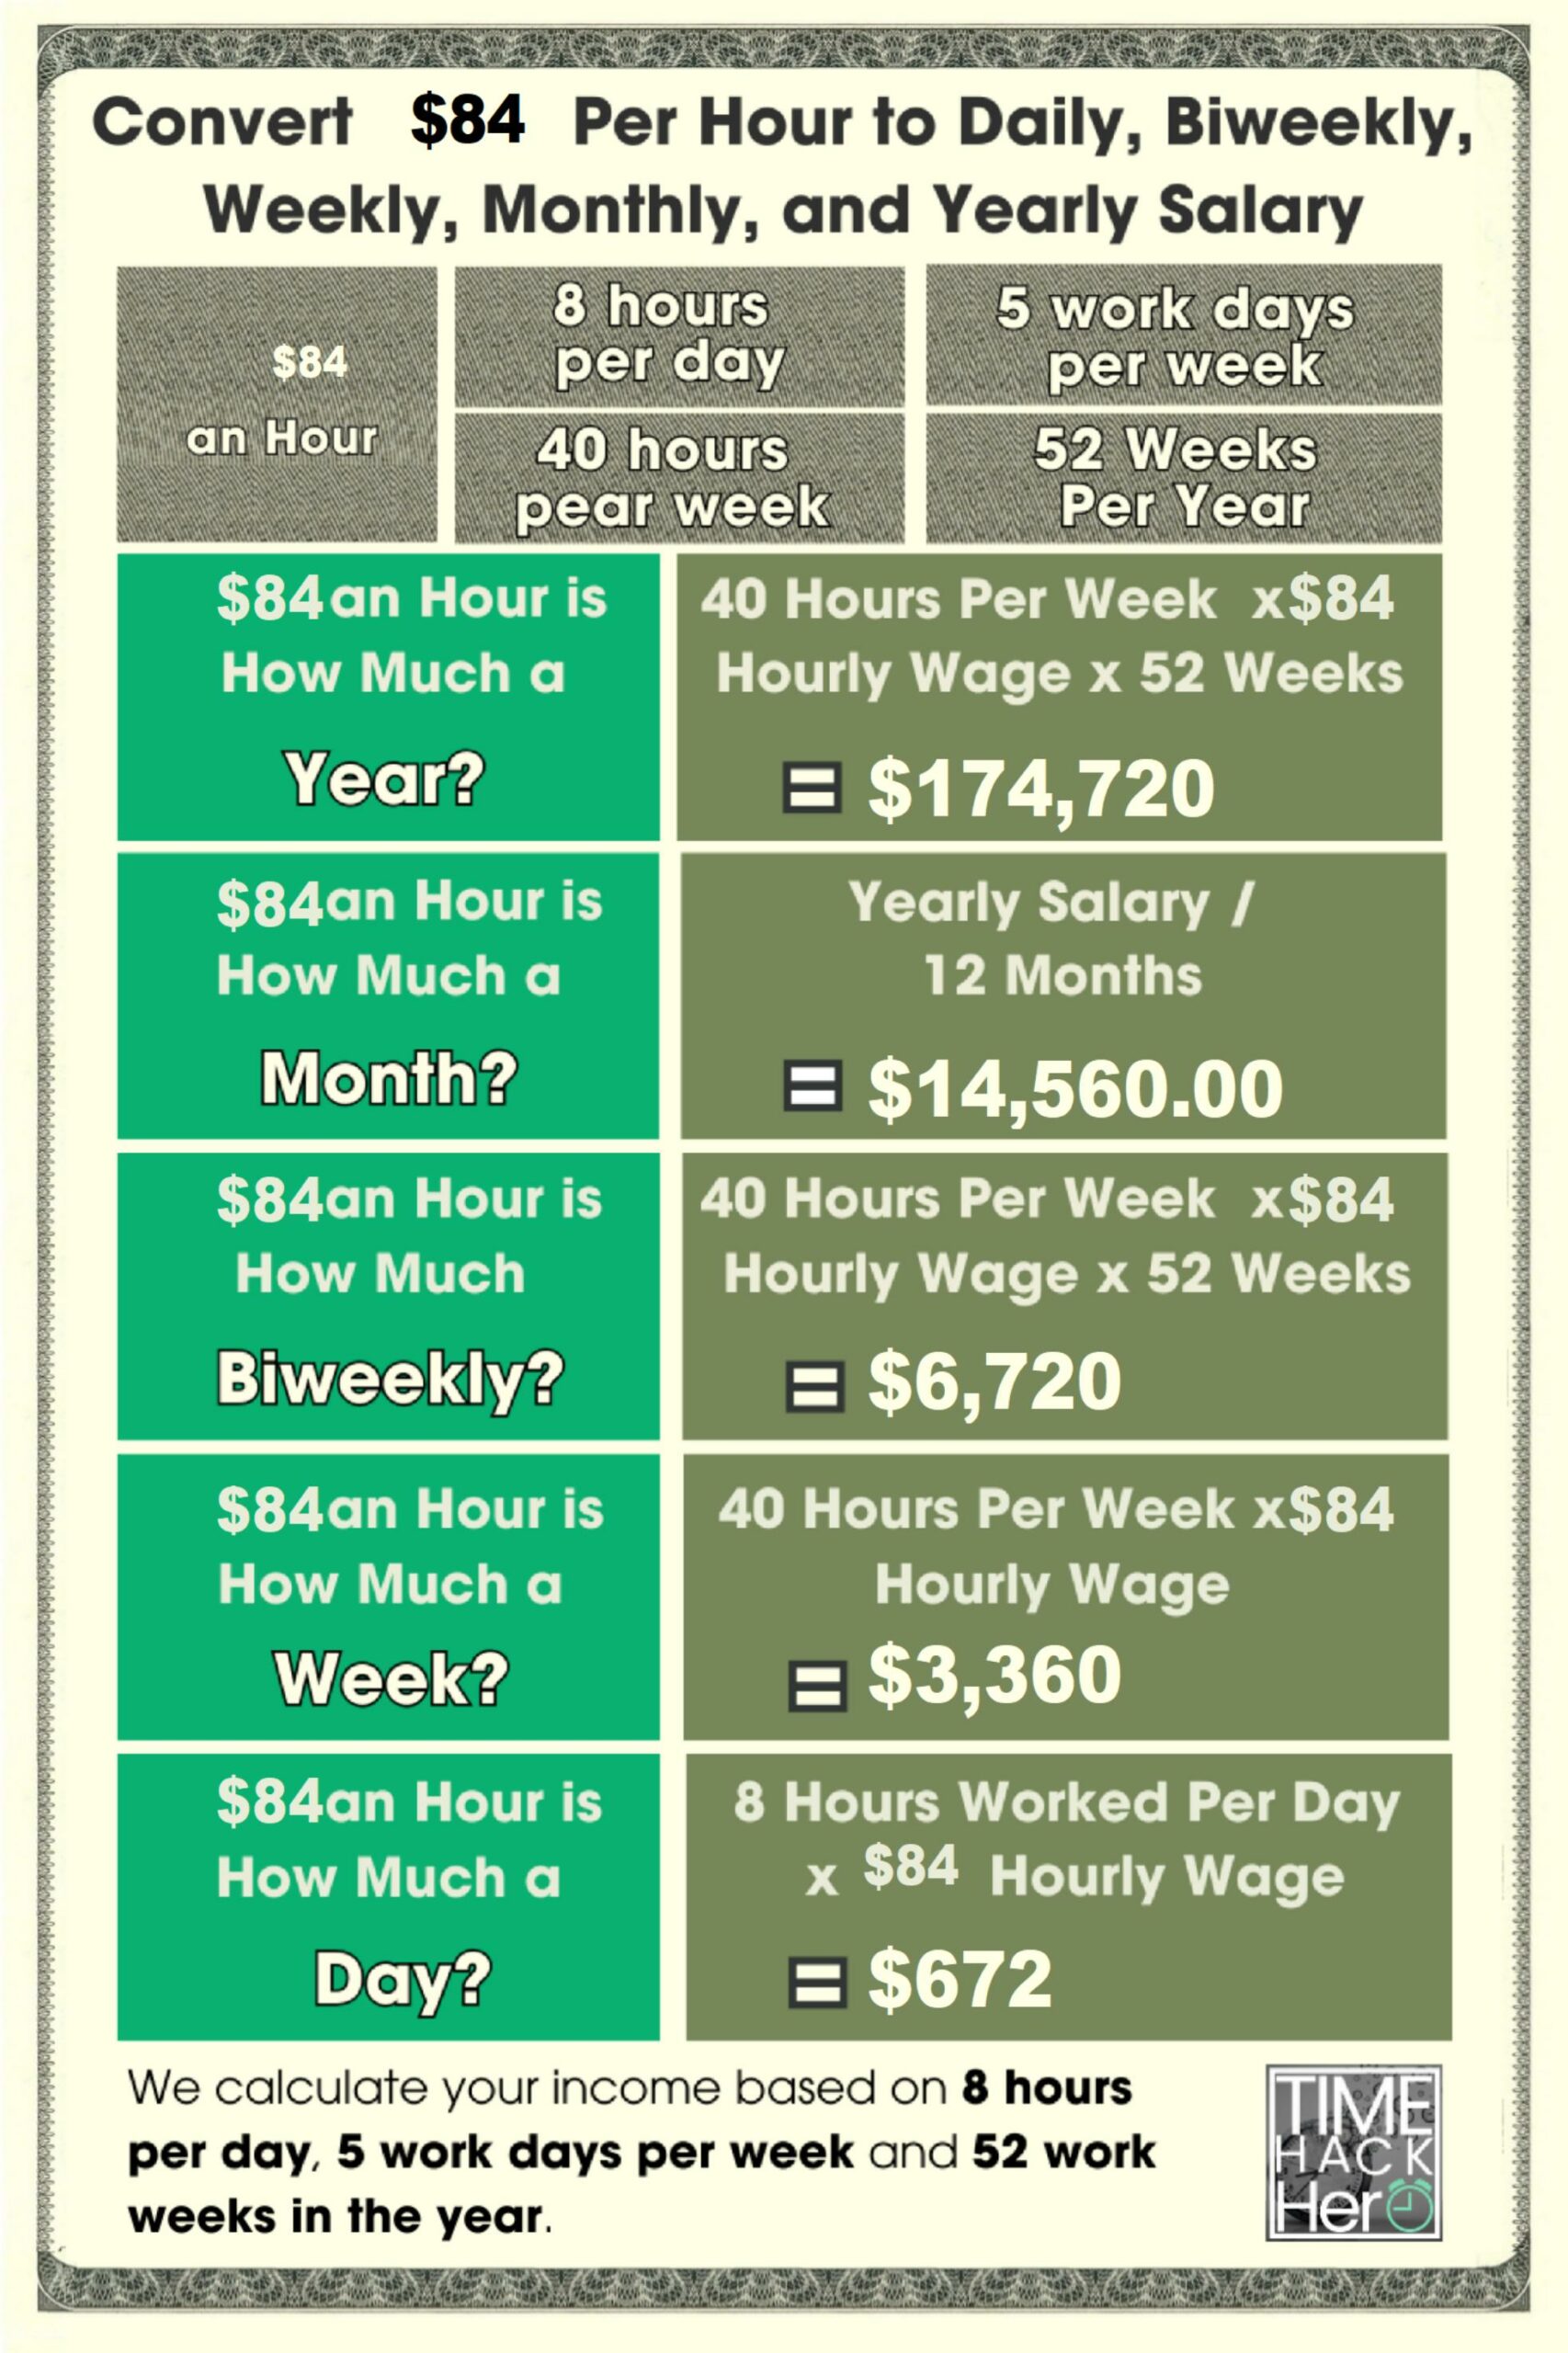 Convert $84 Per Hour to Weekly, Monthly, and Yearly Salary